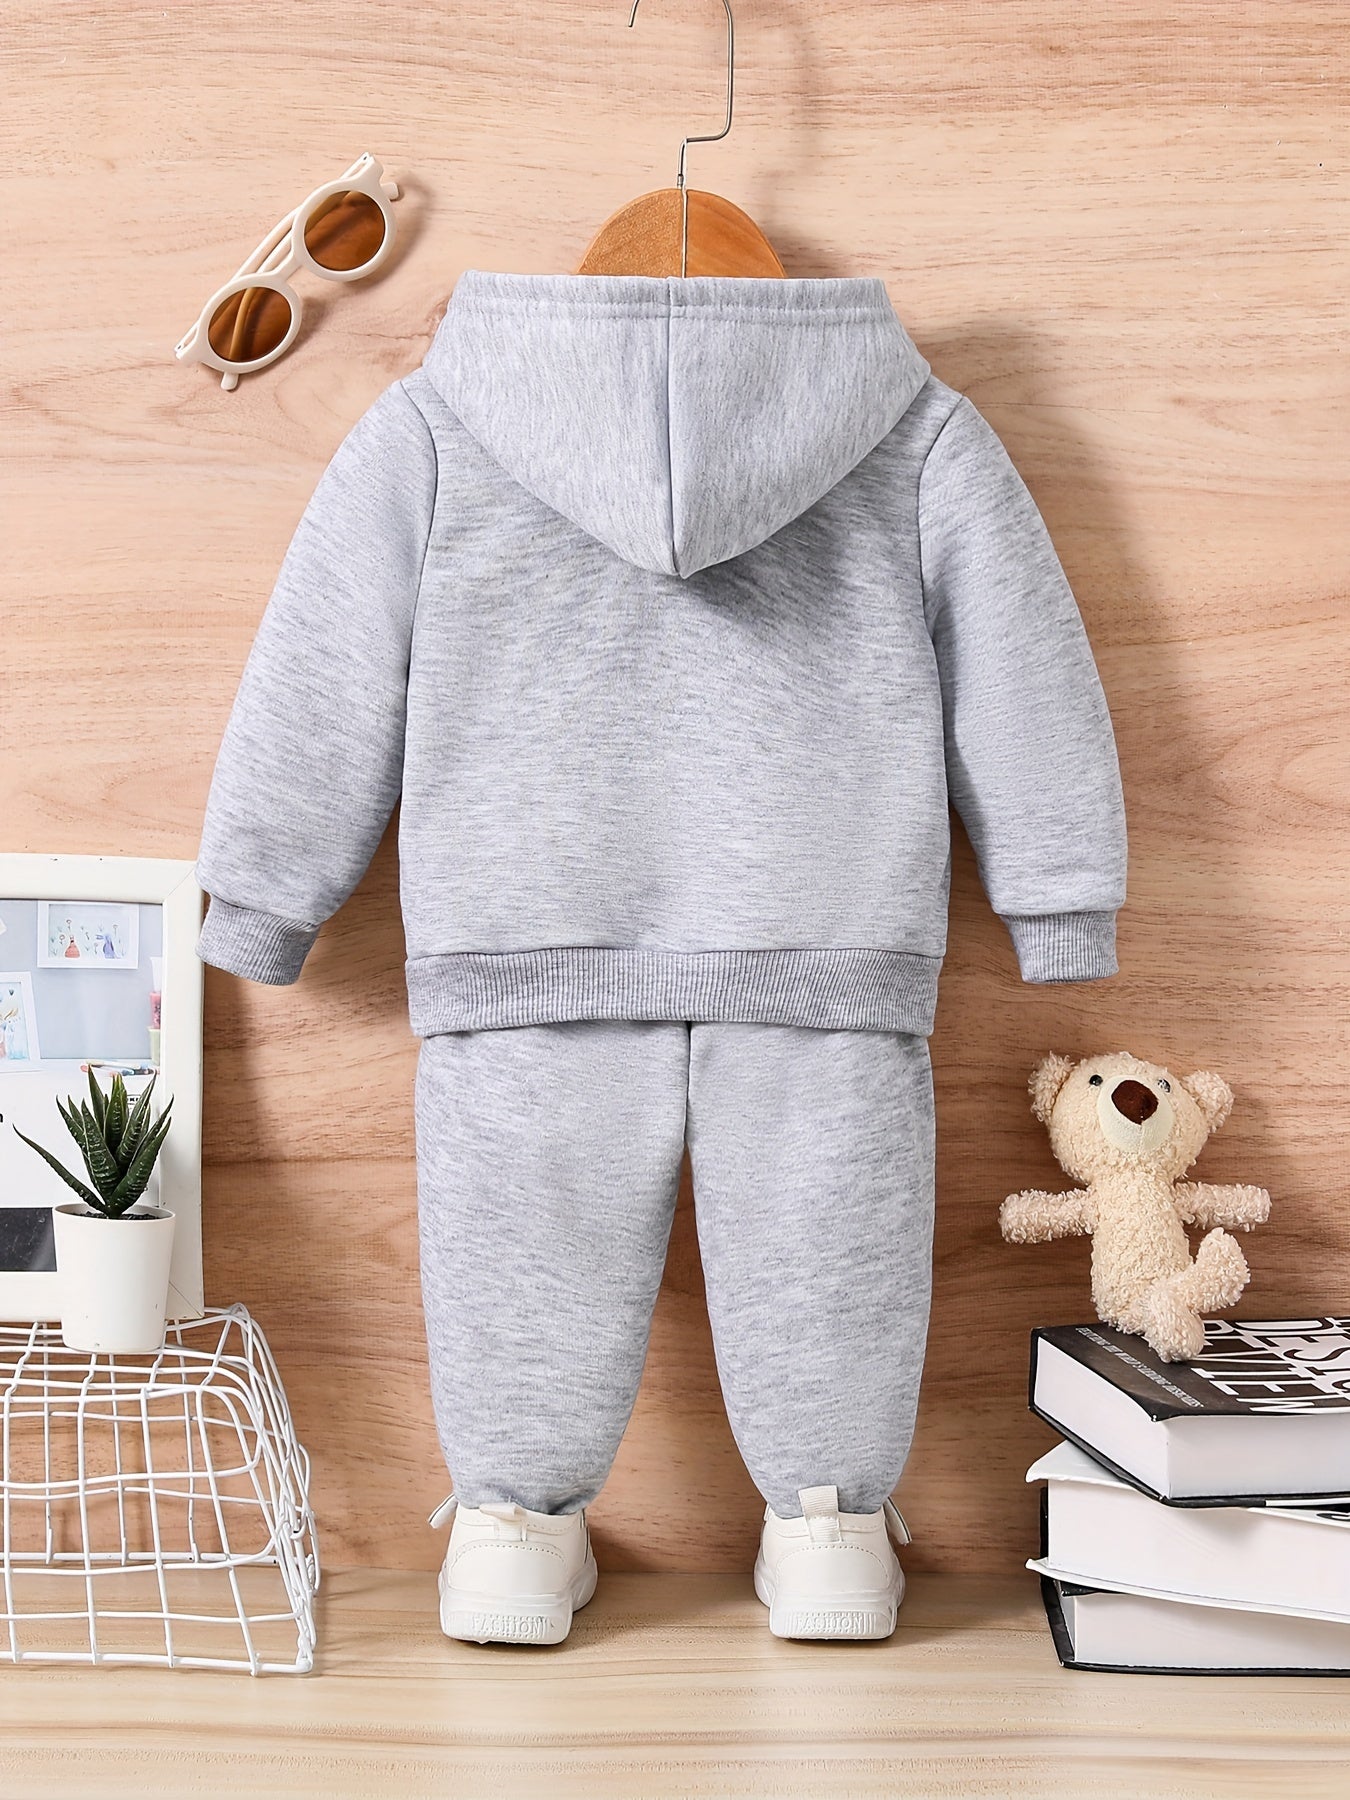 DADDY & ME = BEST FRIENDS Graphic Cute Outfit - Toddler Baby Trousers Long Sleeve Sweatshirt Set